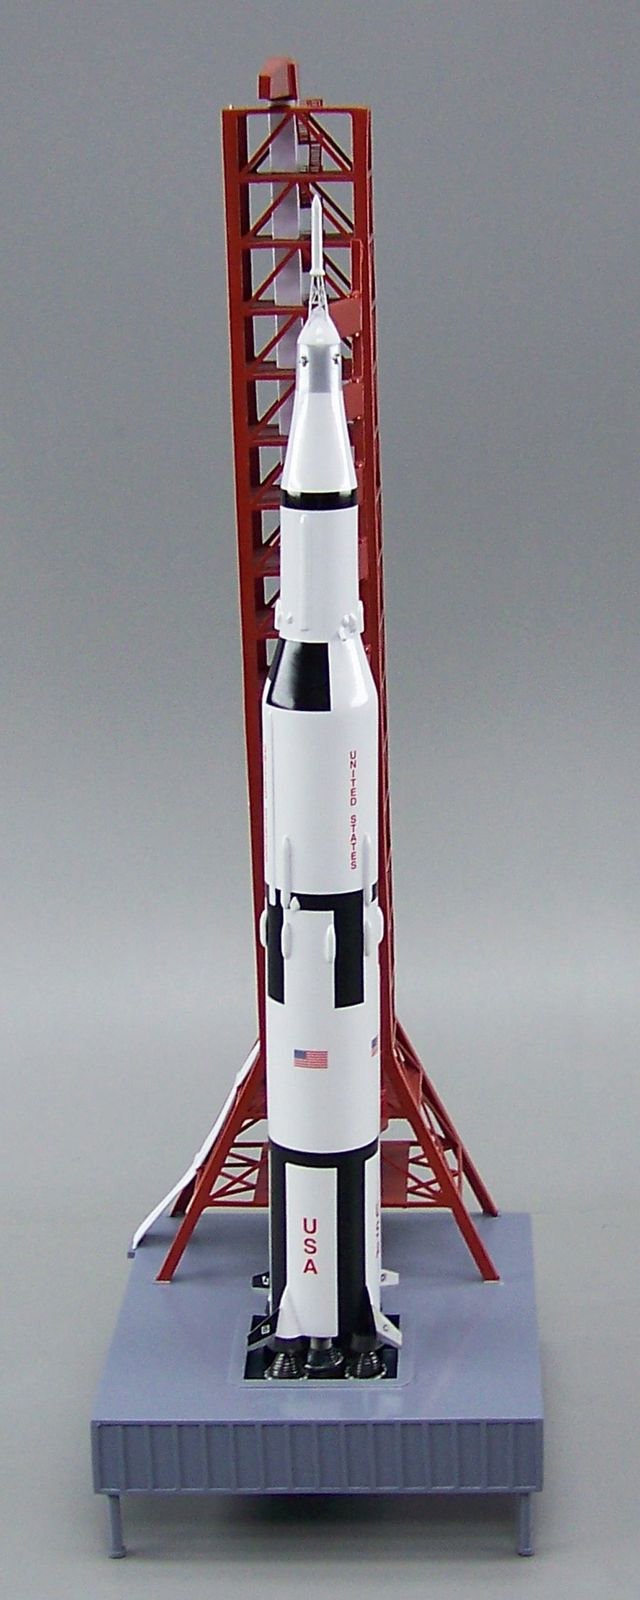 NASA - Apollo Saturn V Rocket on Tower Launch Pad - 1/200 Scale